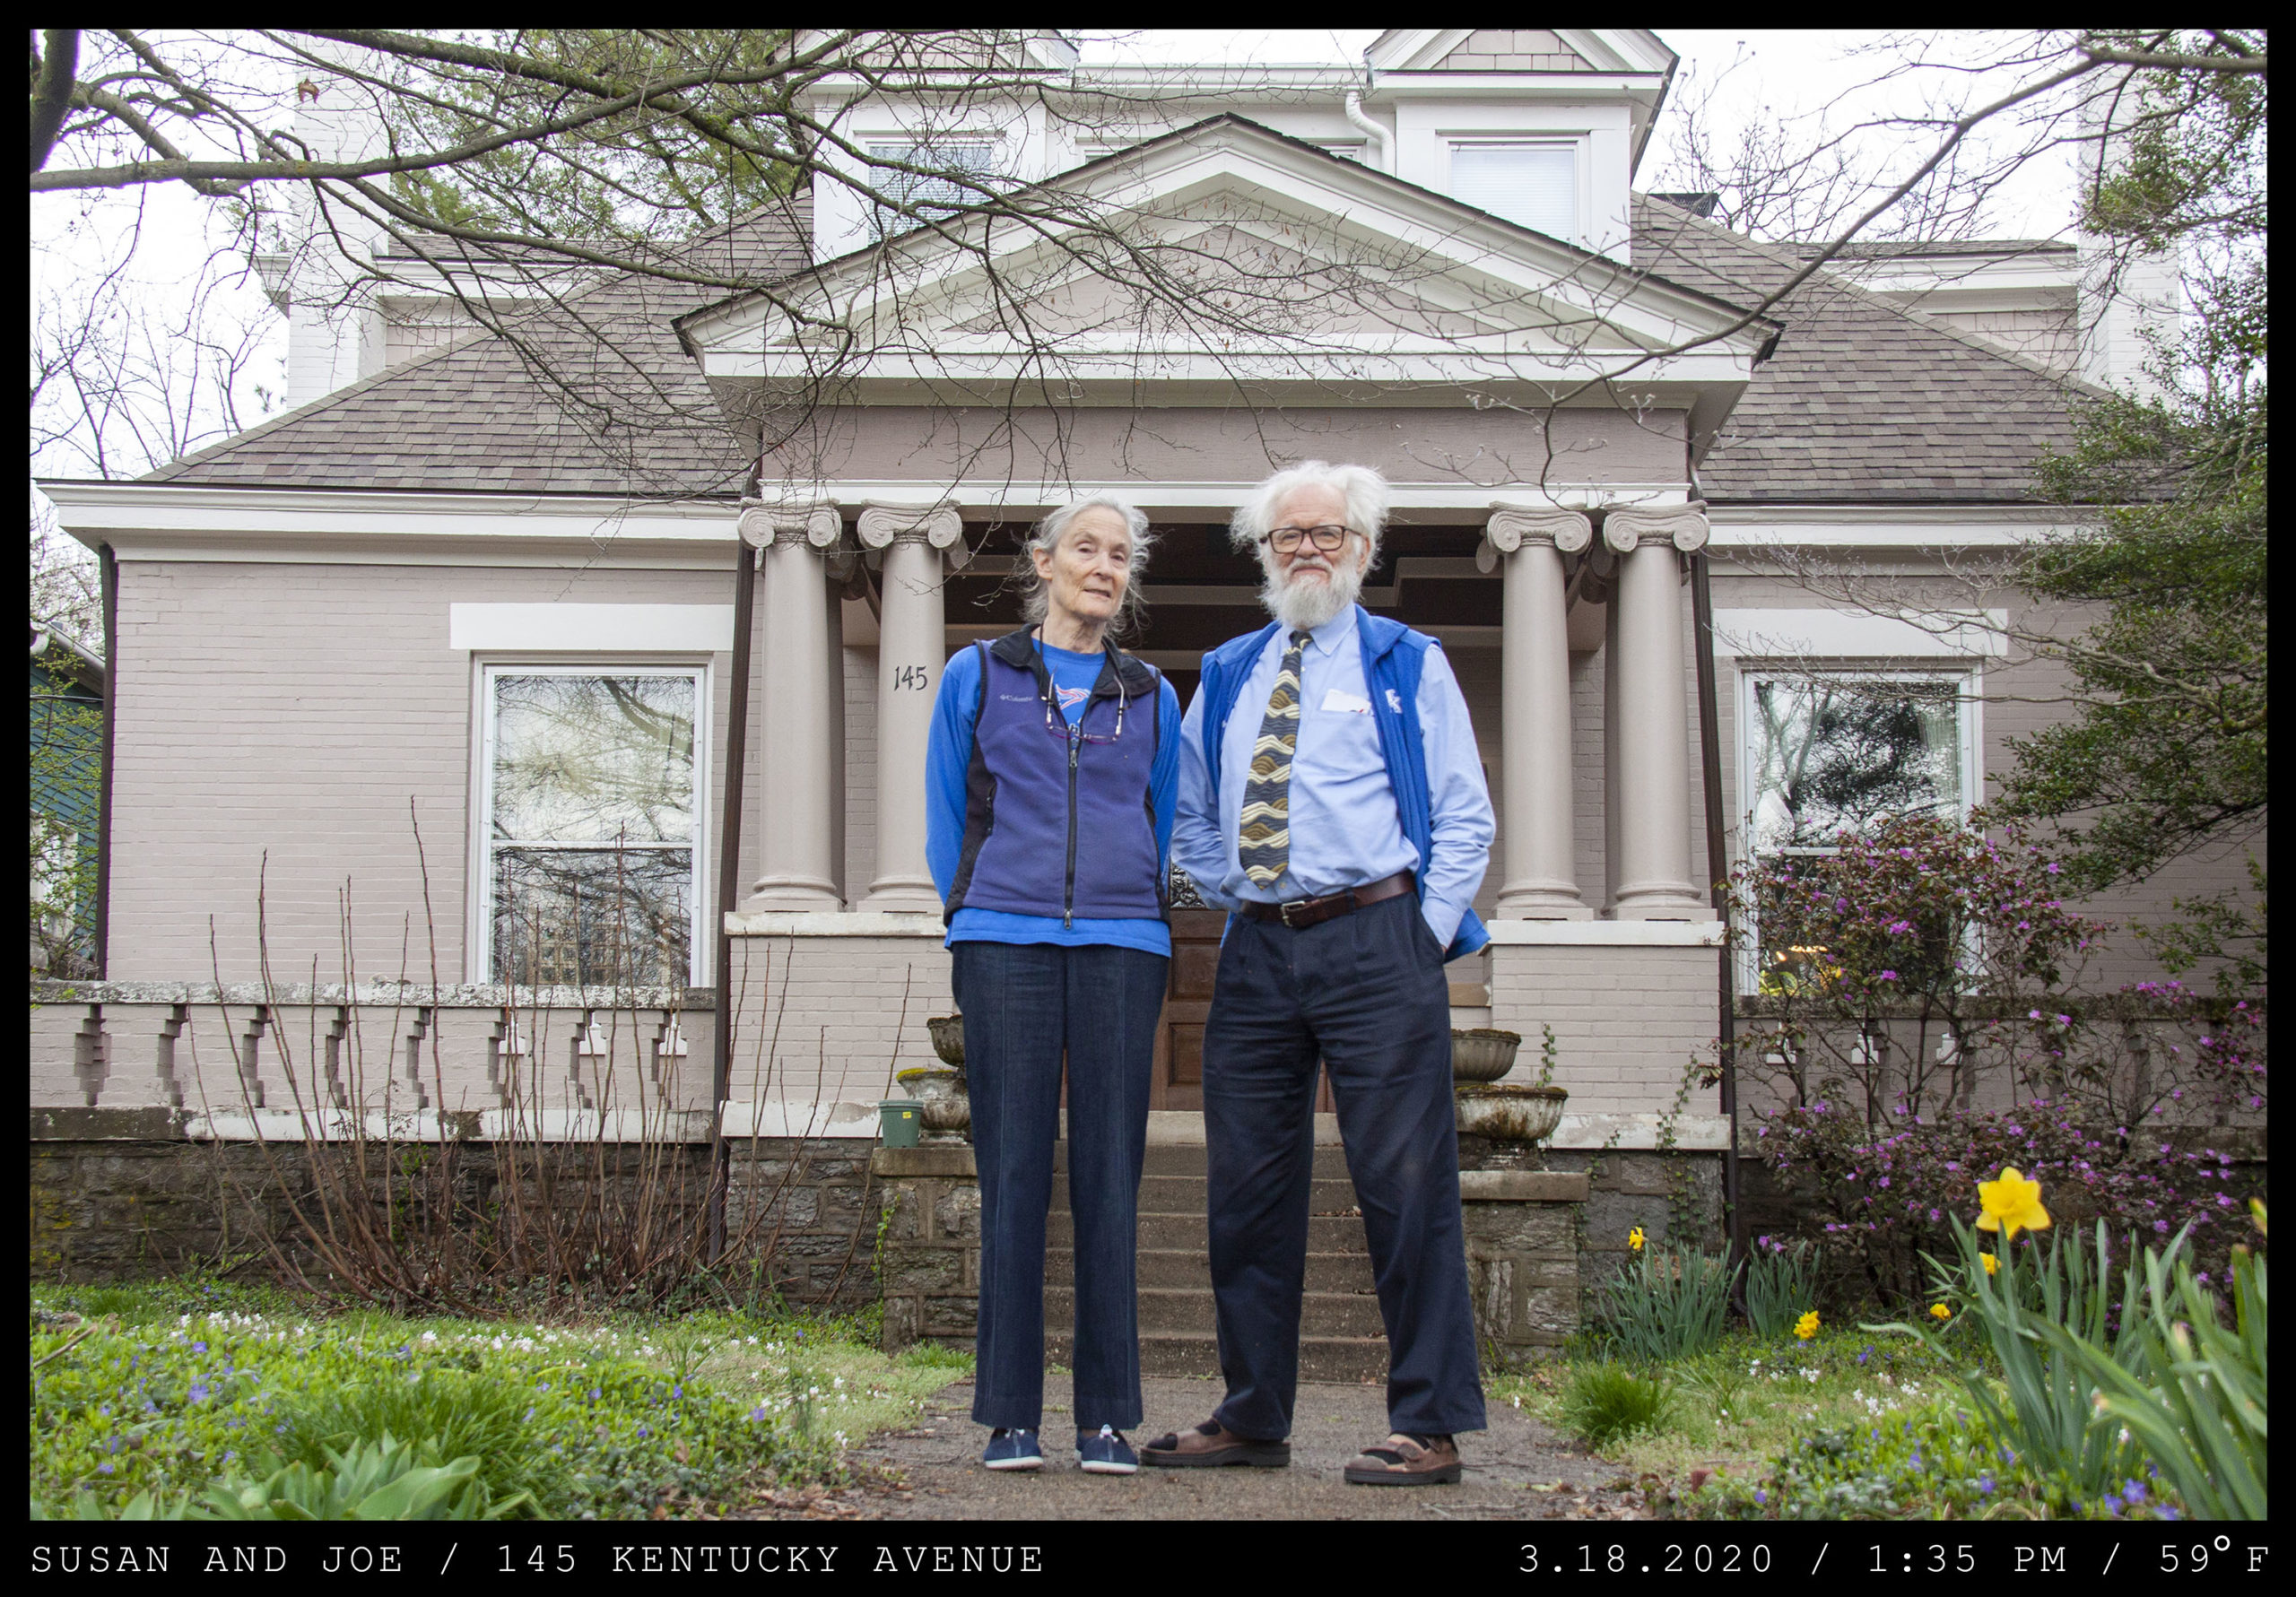 An elderly couple stand in front of a cream brick home with ornate columns. They both wear blue athletic sweater vests. The woman had glasses hanging from a chain on her neck. The main has unkempt white hair, a beard, a blotted patterned tie, and Birkenstocks.